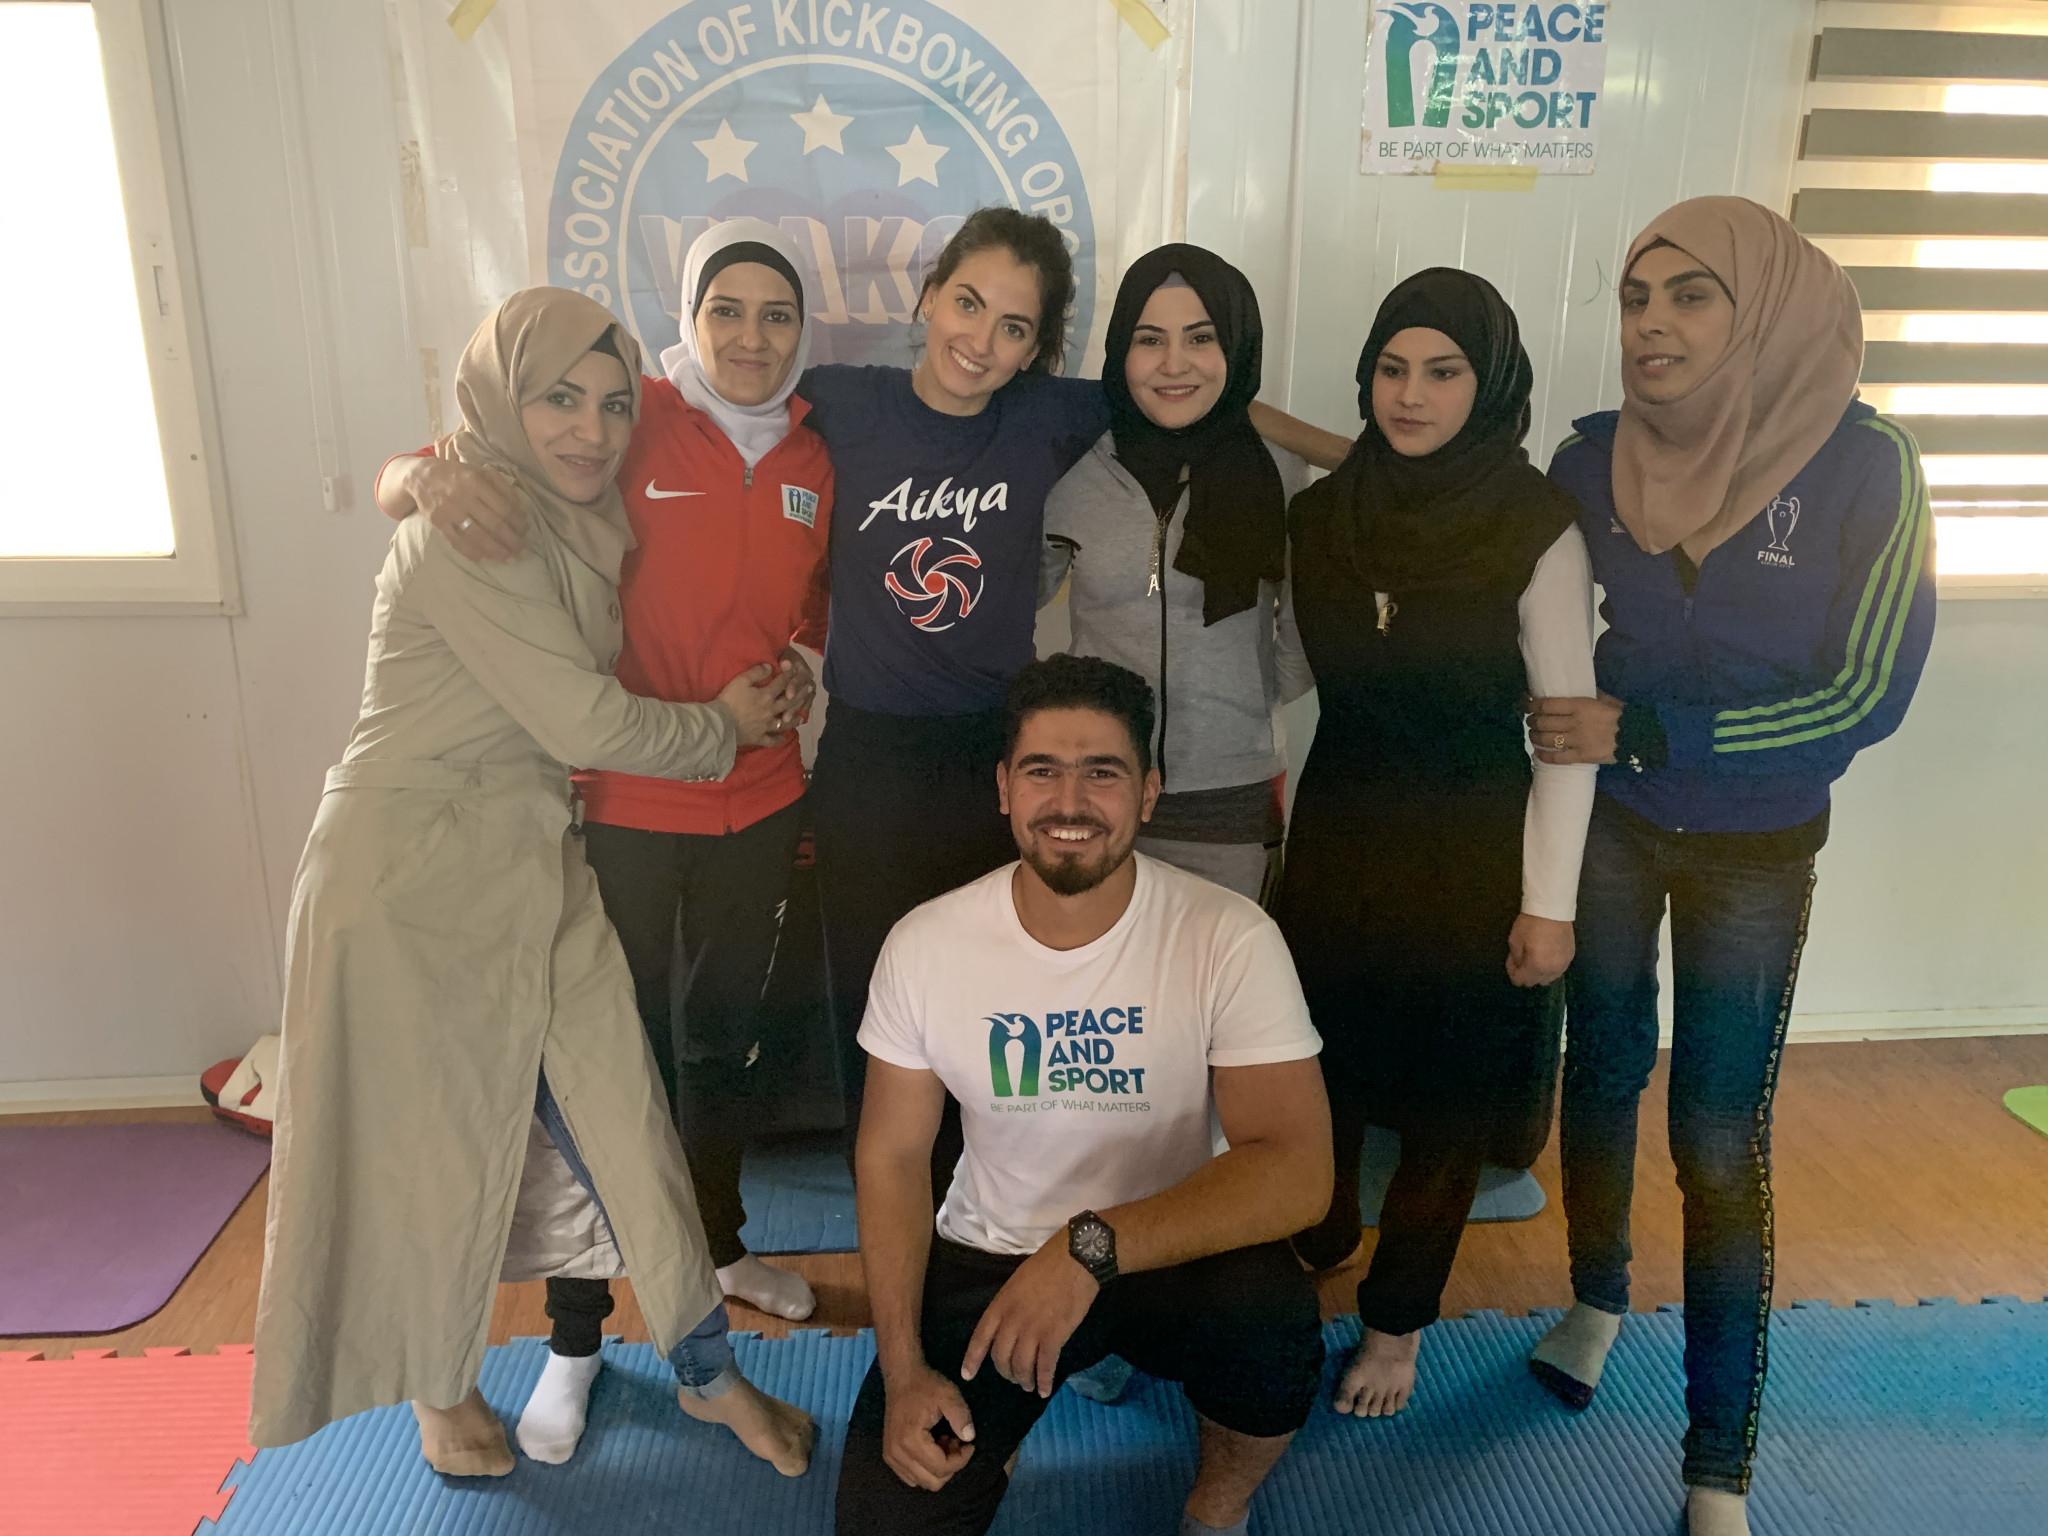 Together with Peace and Sport, Ali Hussein Alkhaldi organises kickboxing training for more than 250 children in the Zaatari refugee camp ©WAKO